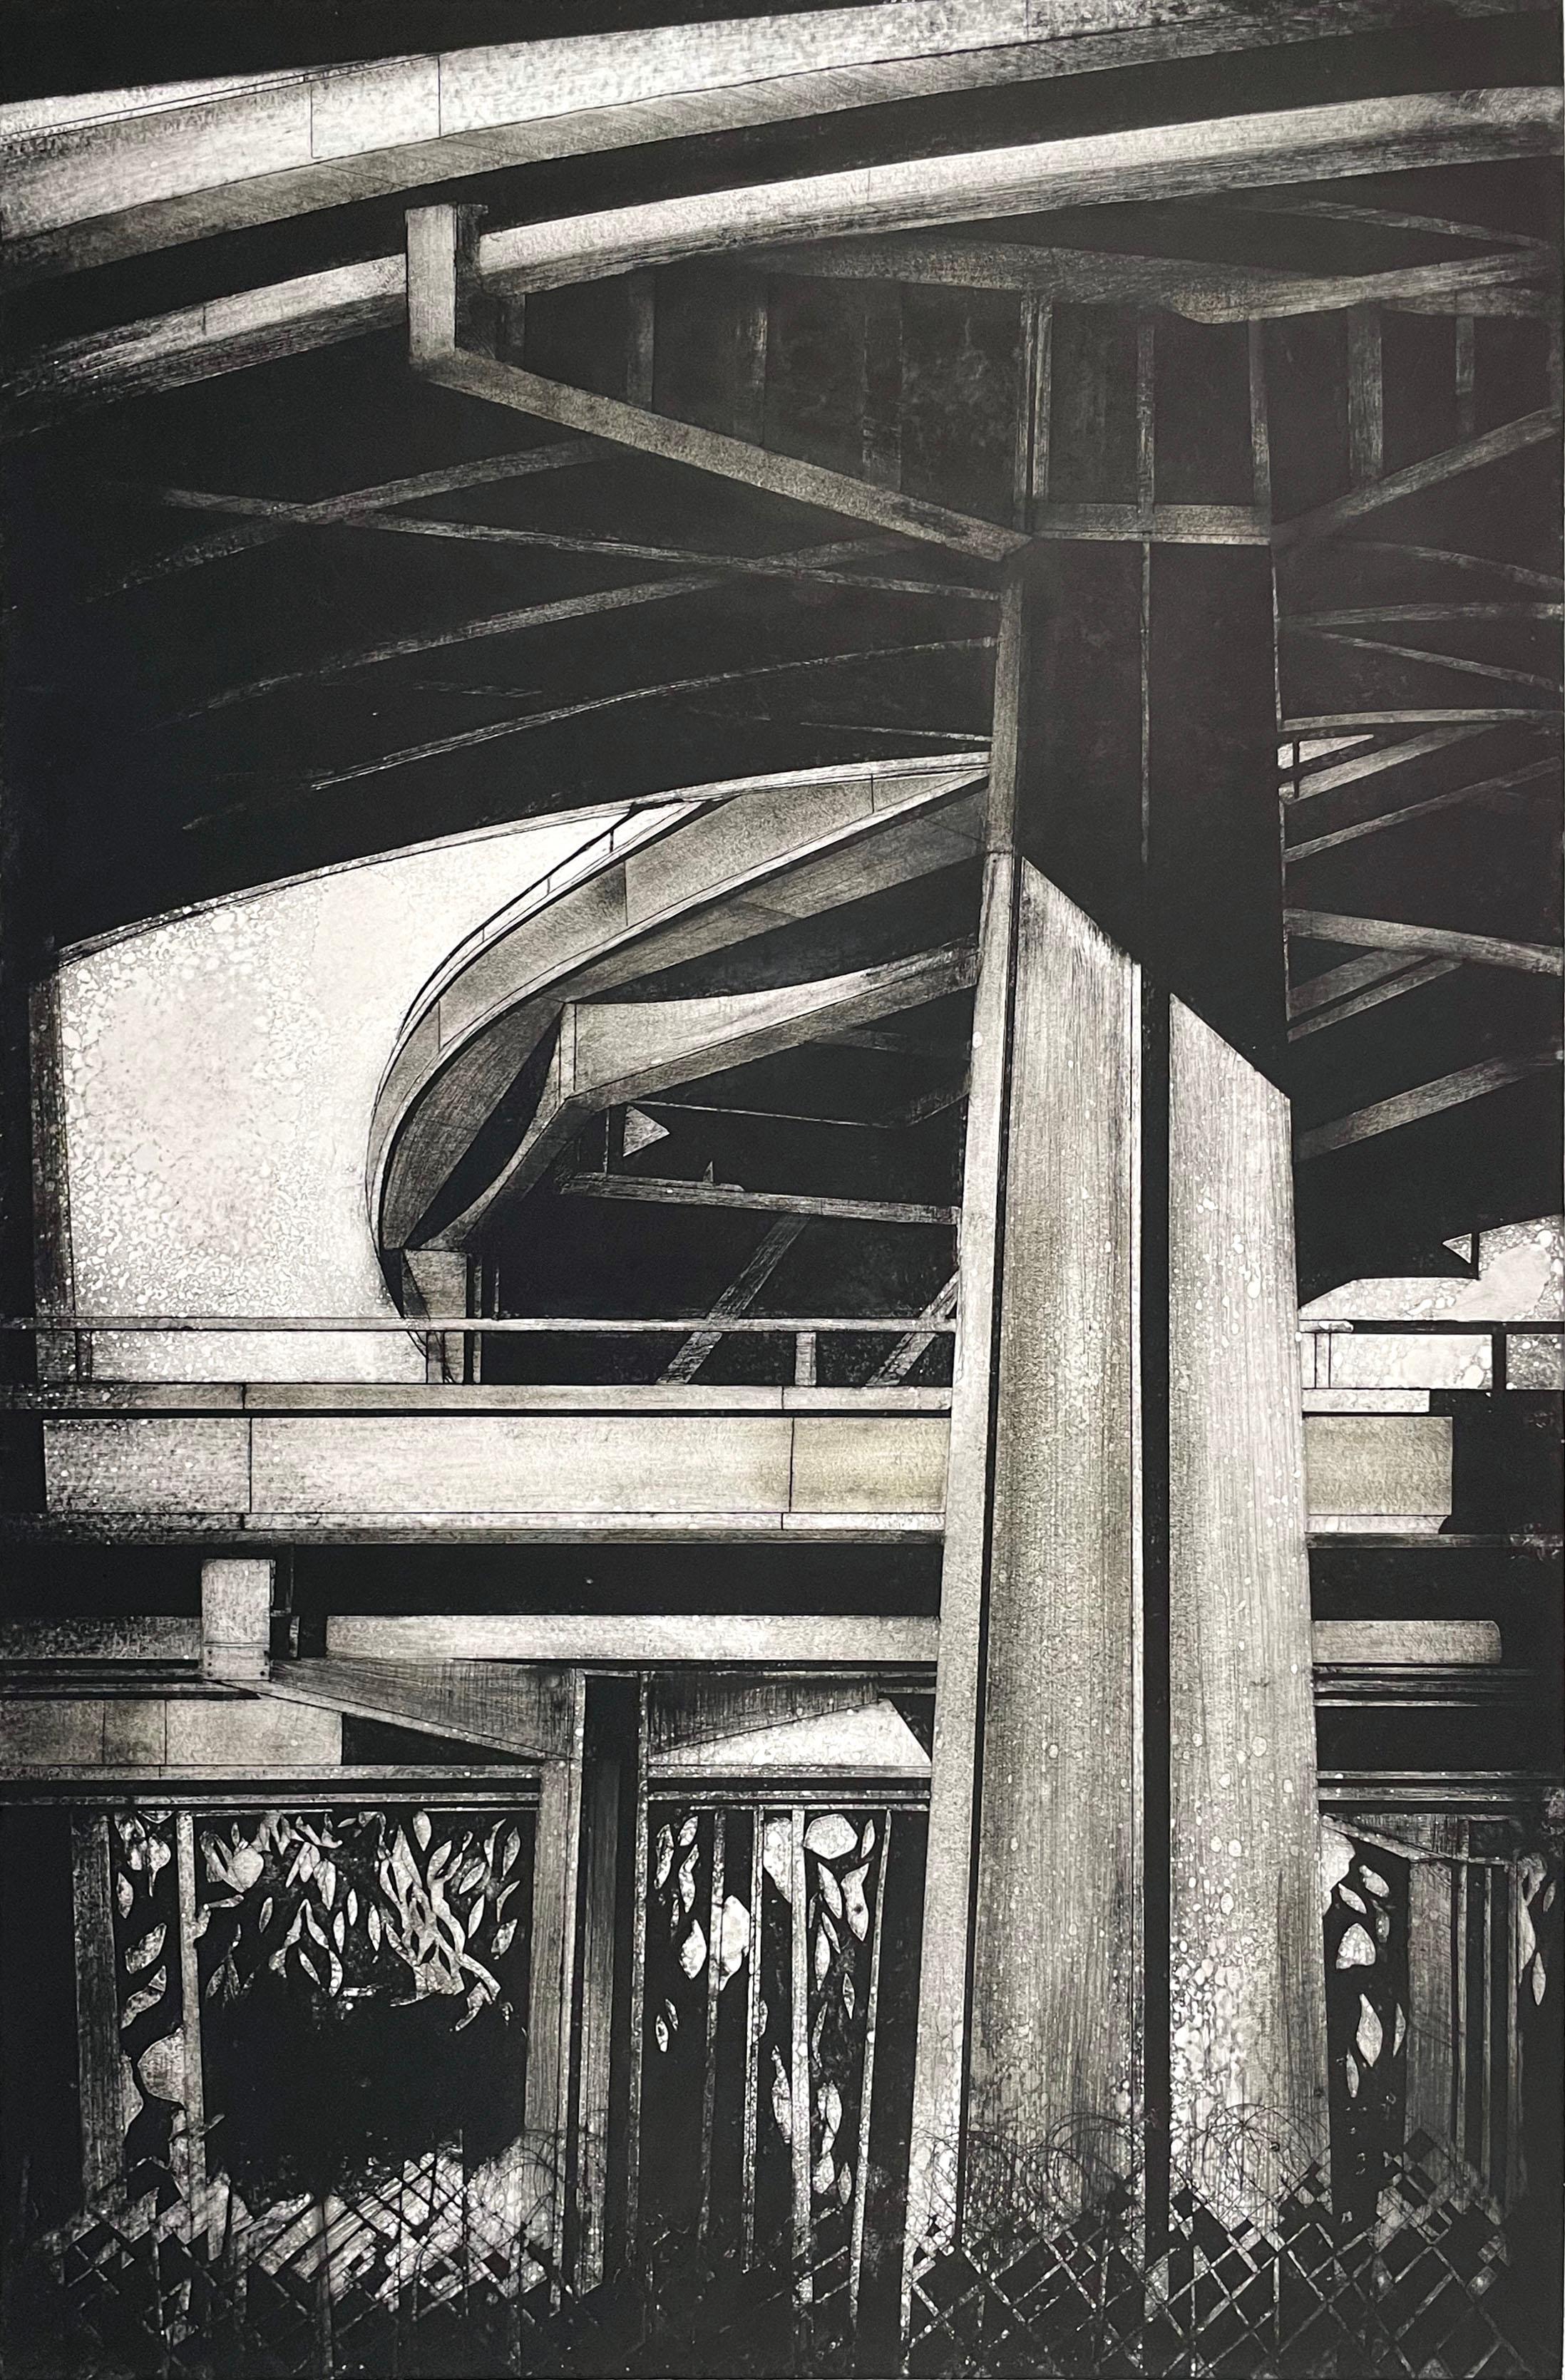 Unique monotype. Signé et numéroté par l'artiste. Monumental image of a freeway overpass.

In October 2019 Robinson received the Mario Avati Gravure Laureate Award from the Academie des Beaux Arts in Paris. The award is given to an artist who